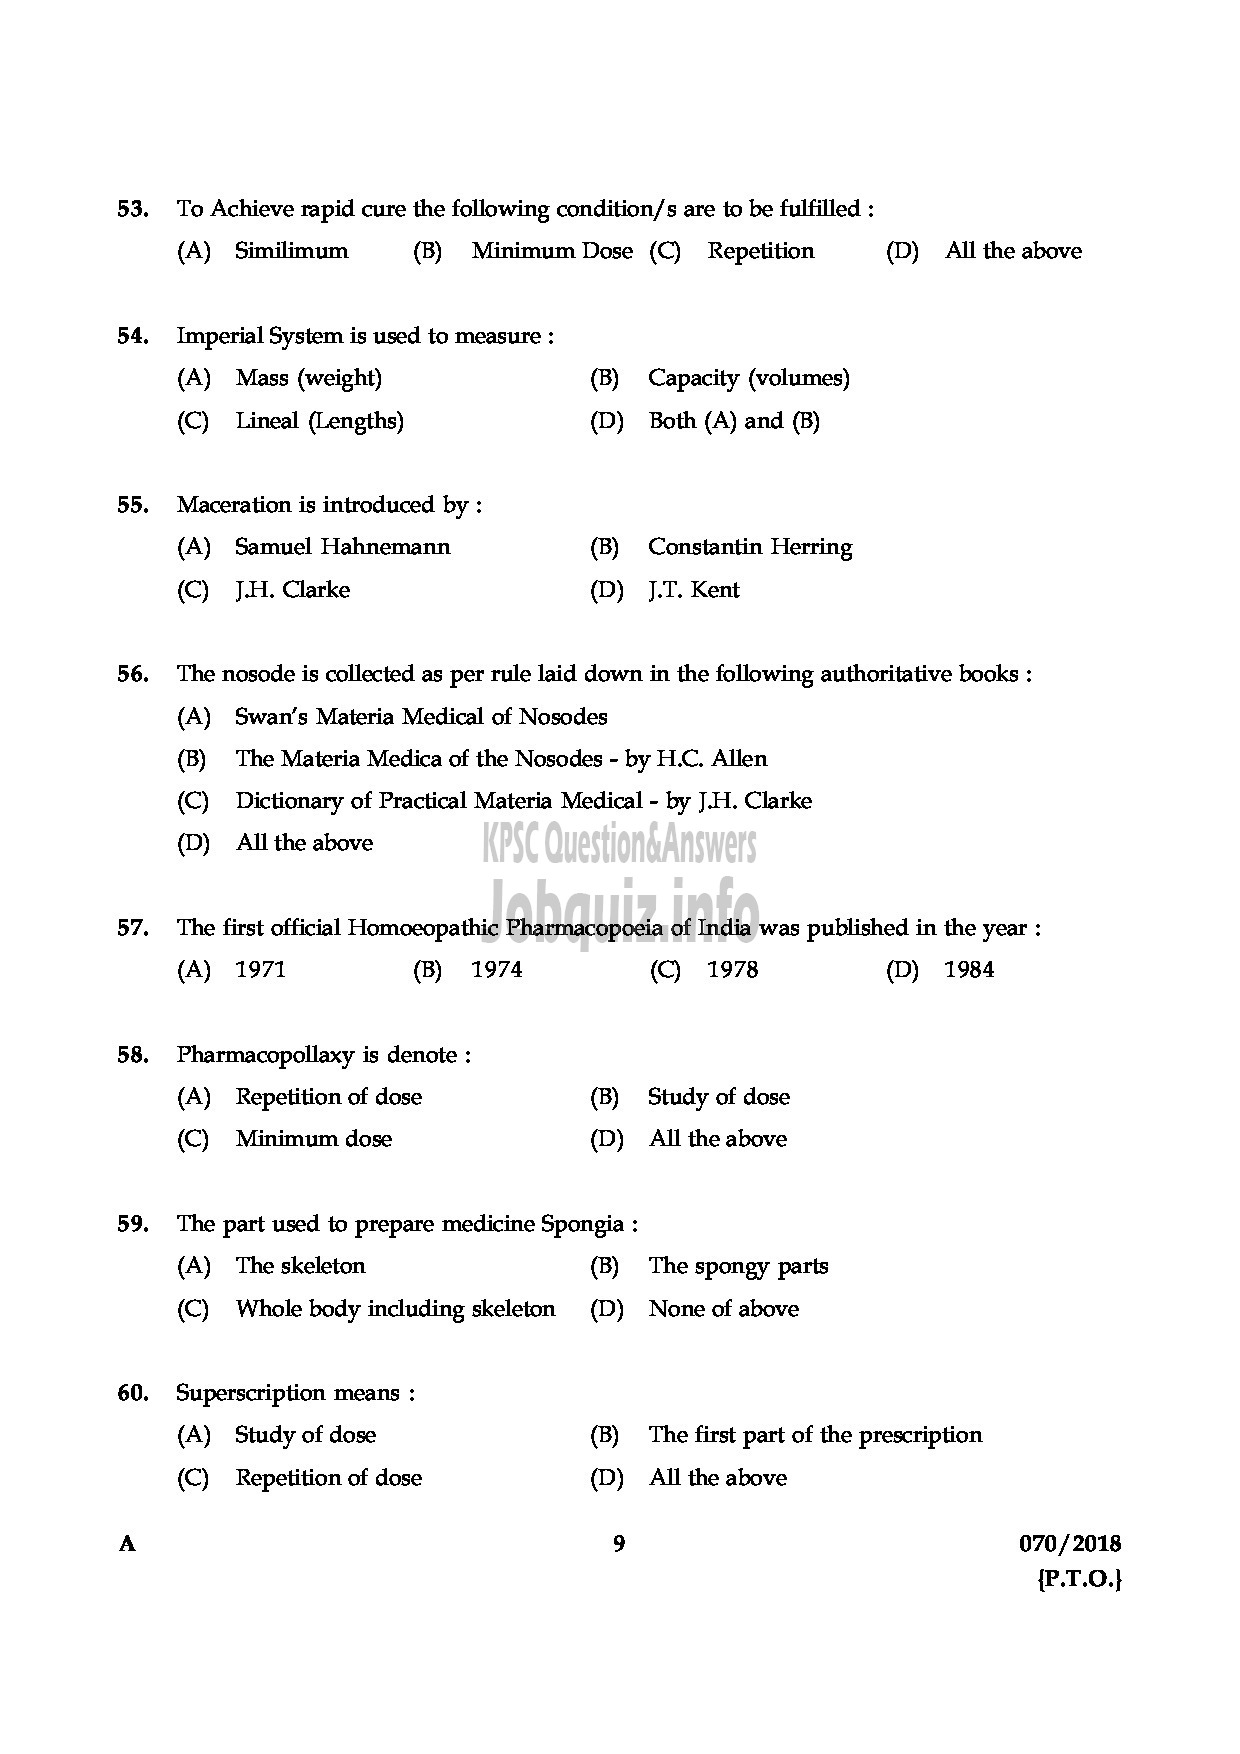 Kerala PSC Question Paper - MEDICAL OFFICER HOMOEO/ ASSISTANT INSURANCE MEDICAL OFFICER HOMOEO HOMOEOPATHY/ INSURANCE MEDICAL SERVICES-9